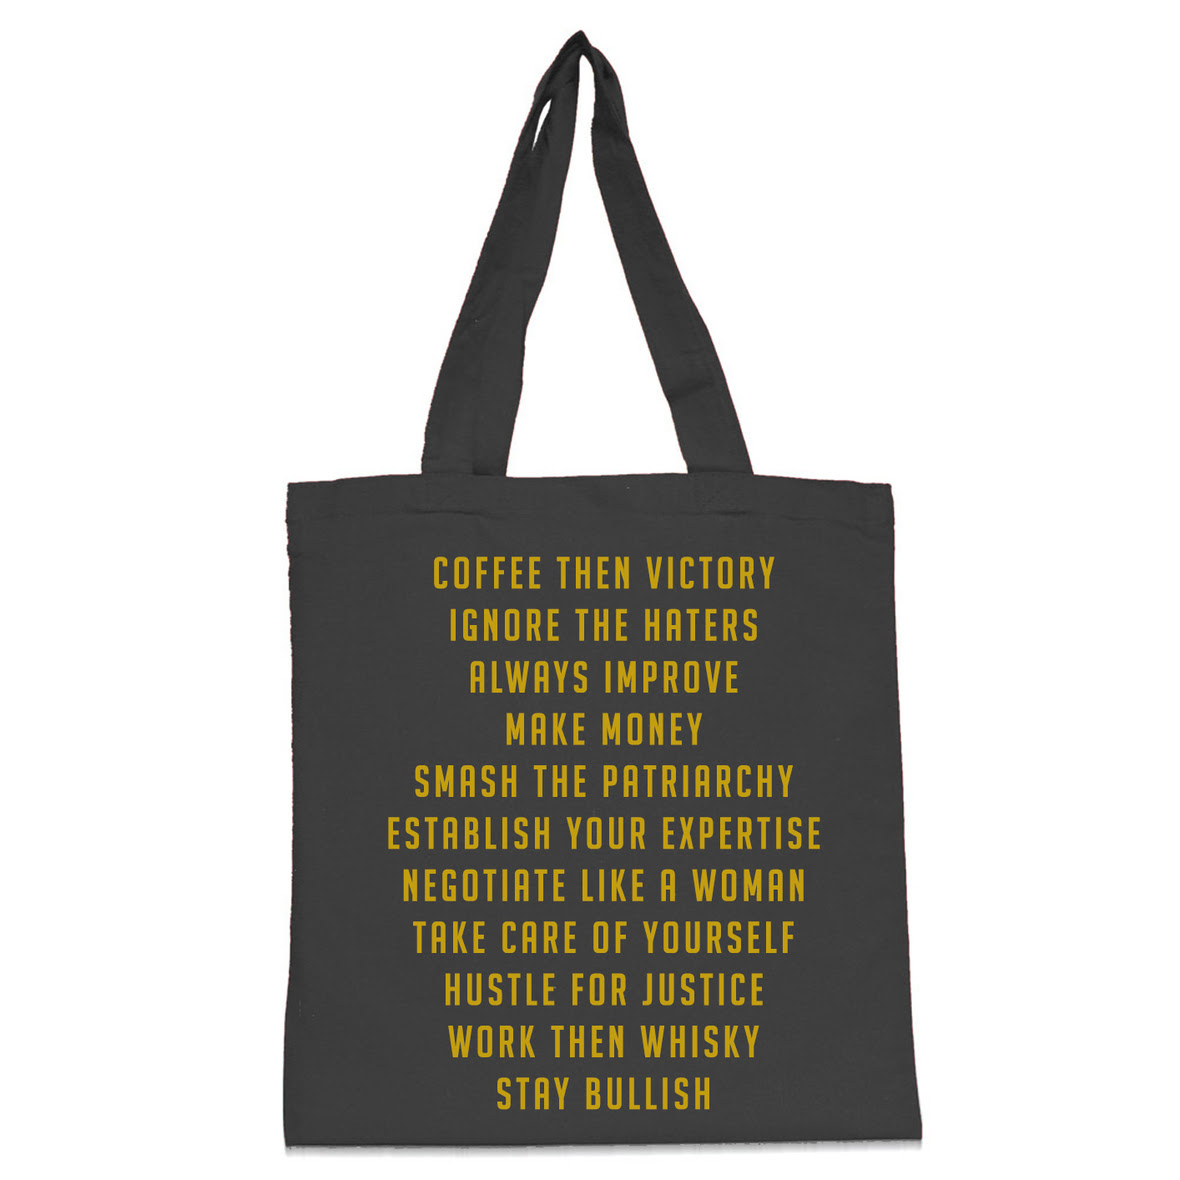 Coffee then victory tote